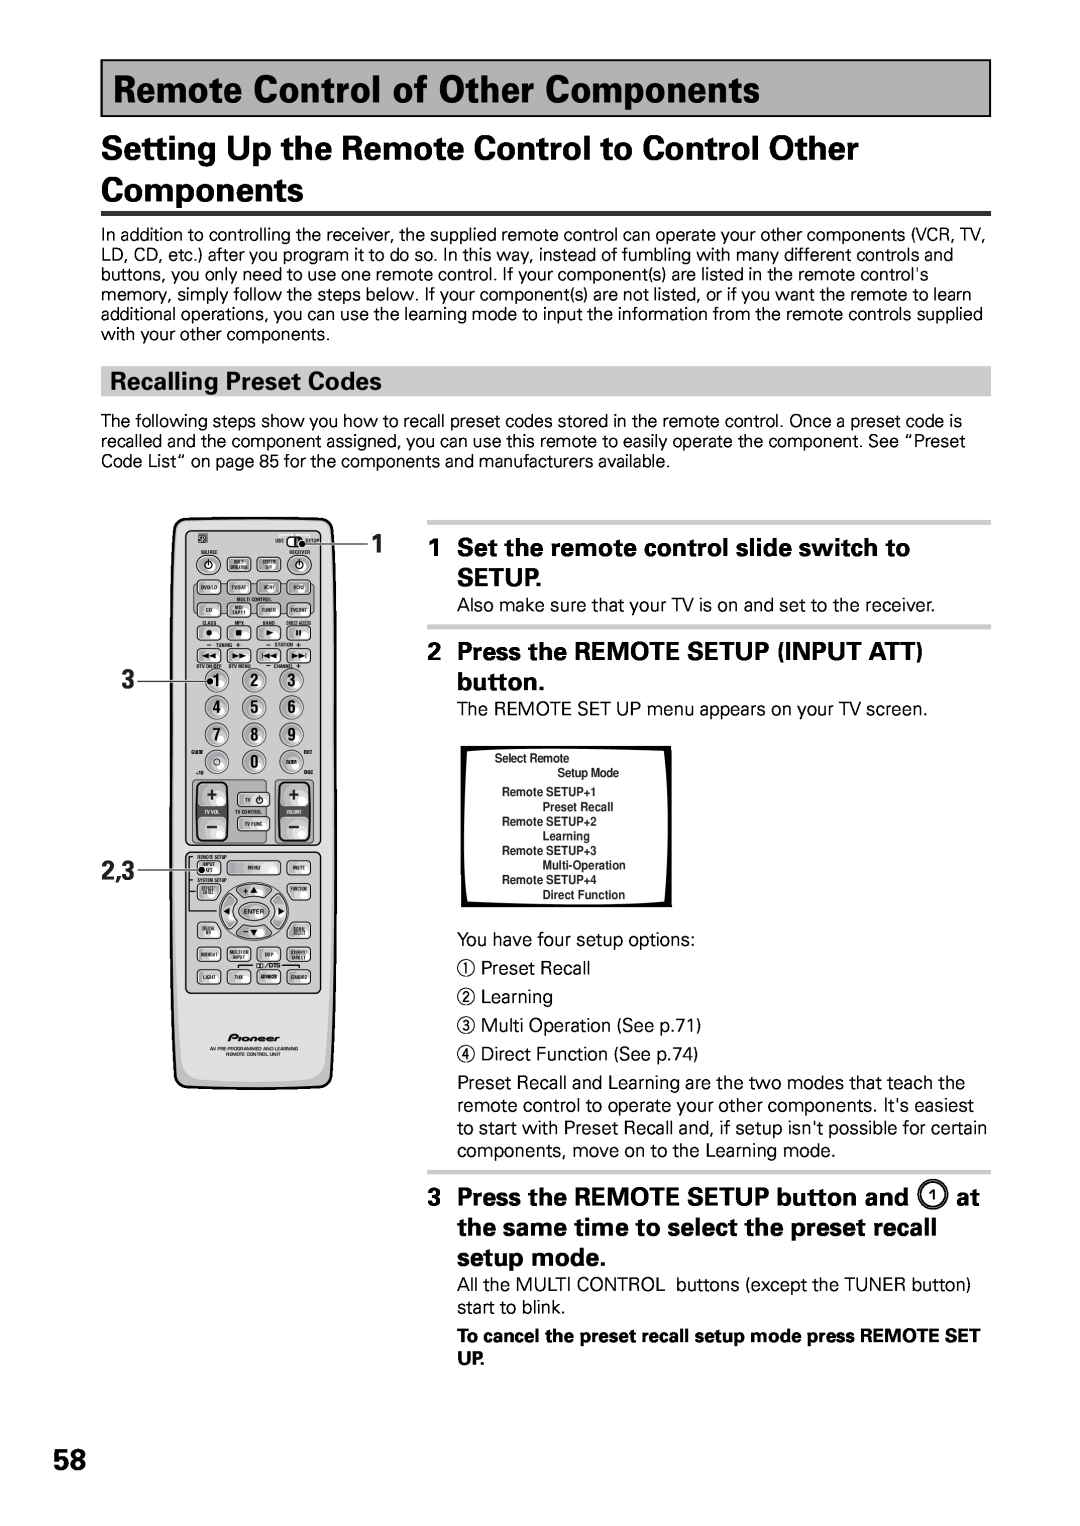 Pioneer VSX-36TX Remote Control of Other Components, 3 2,3, Recalling Preset Codes, Set the remote control slide switch to 